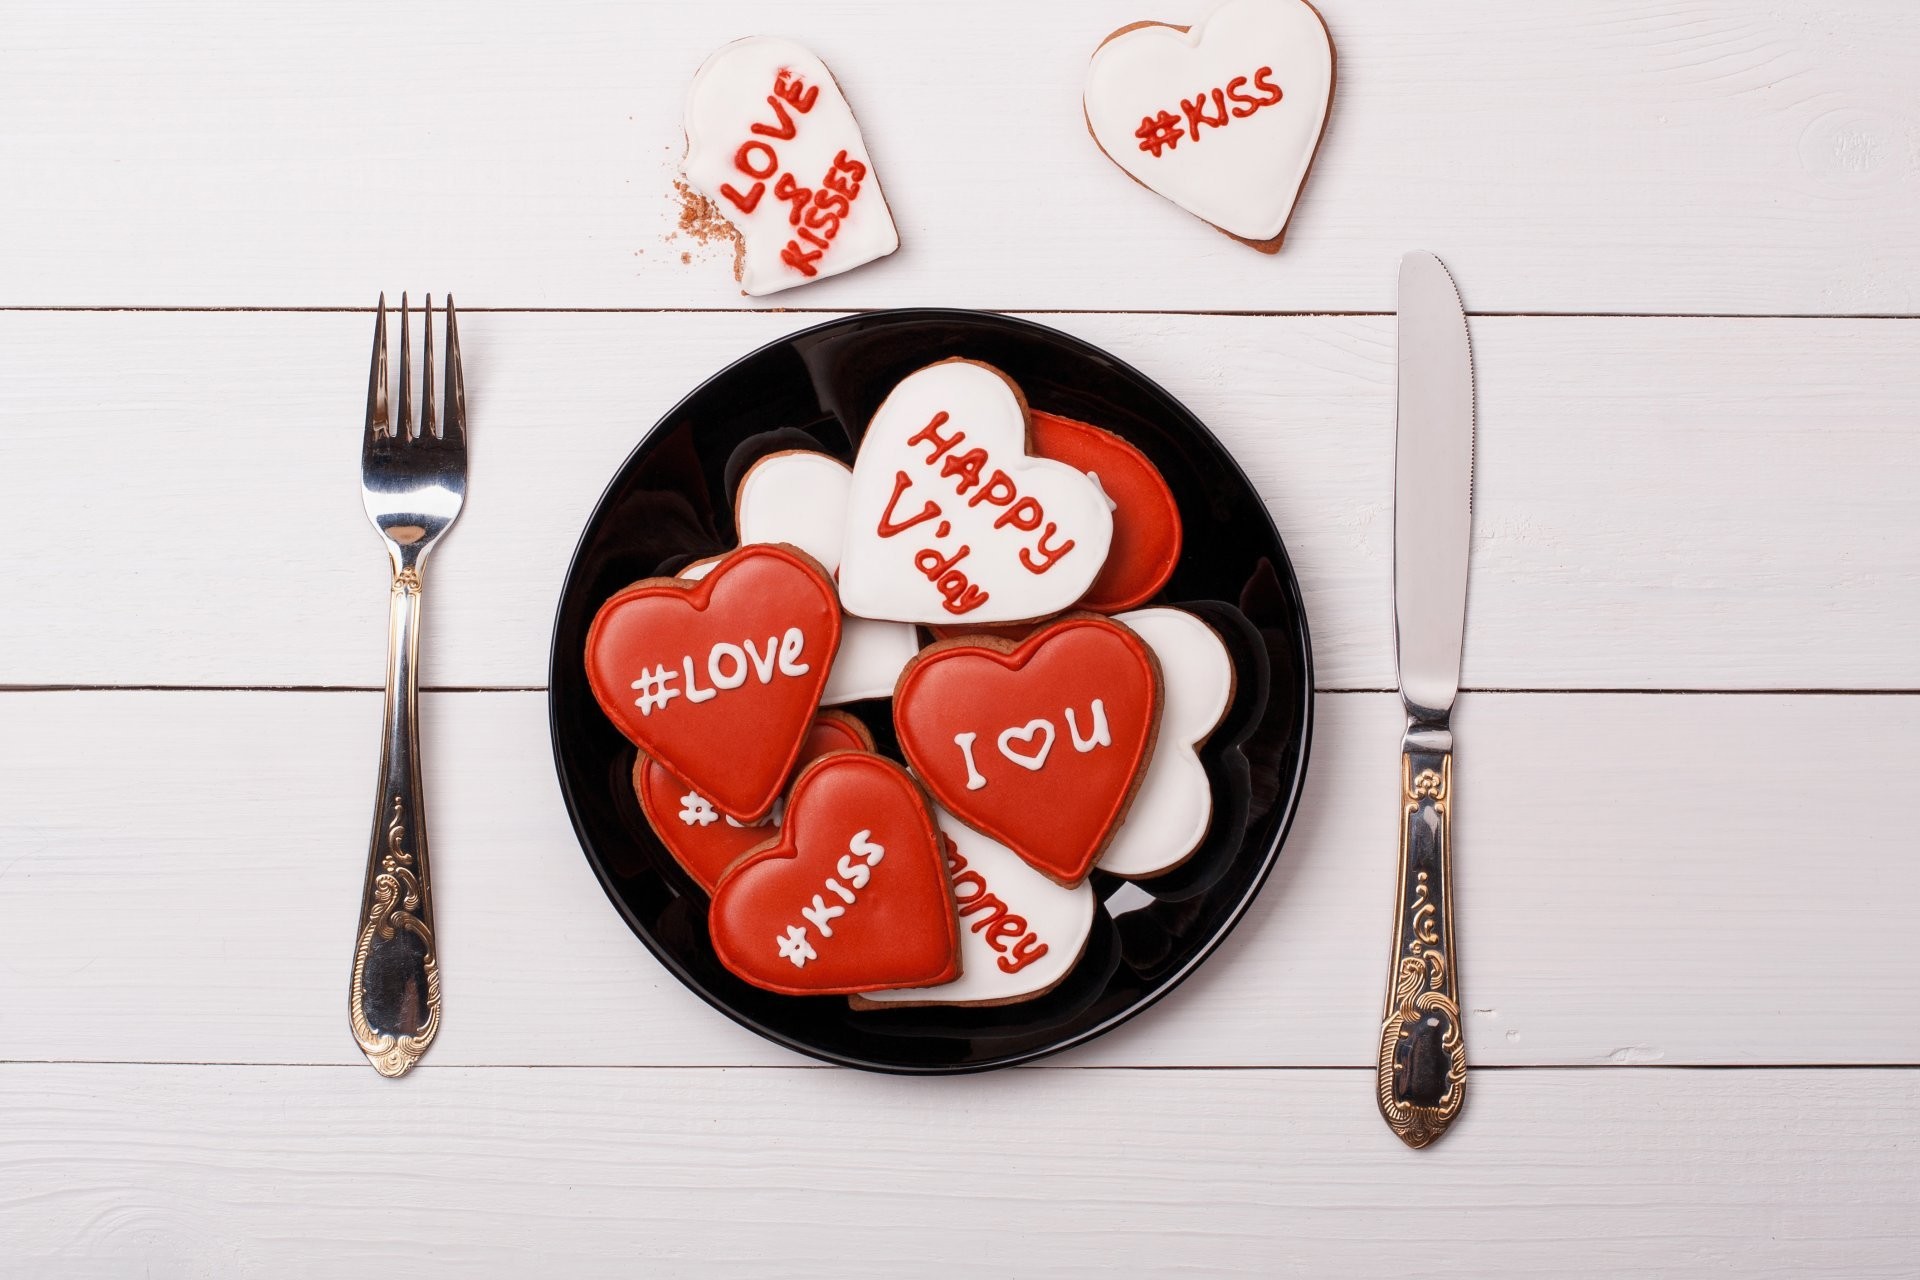 Heart dish fork knife table tags valentines day 14 february valentines day dinner breakfast